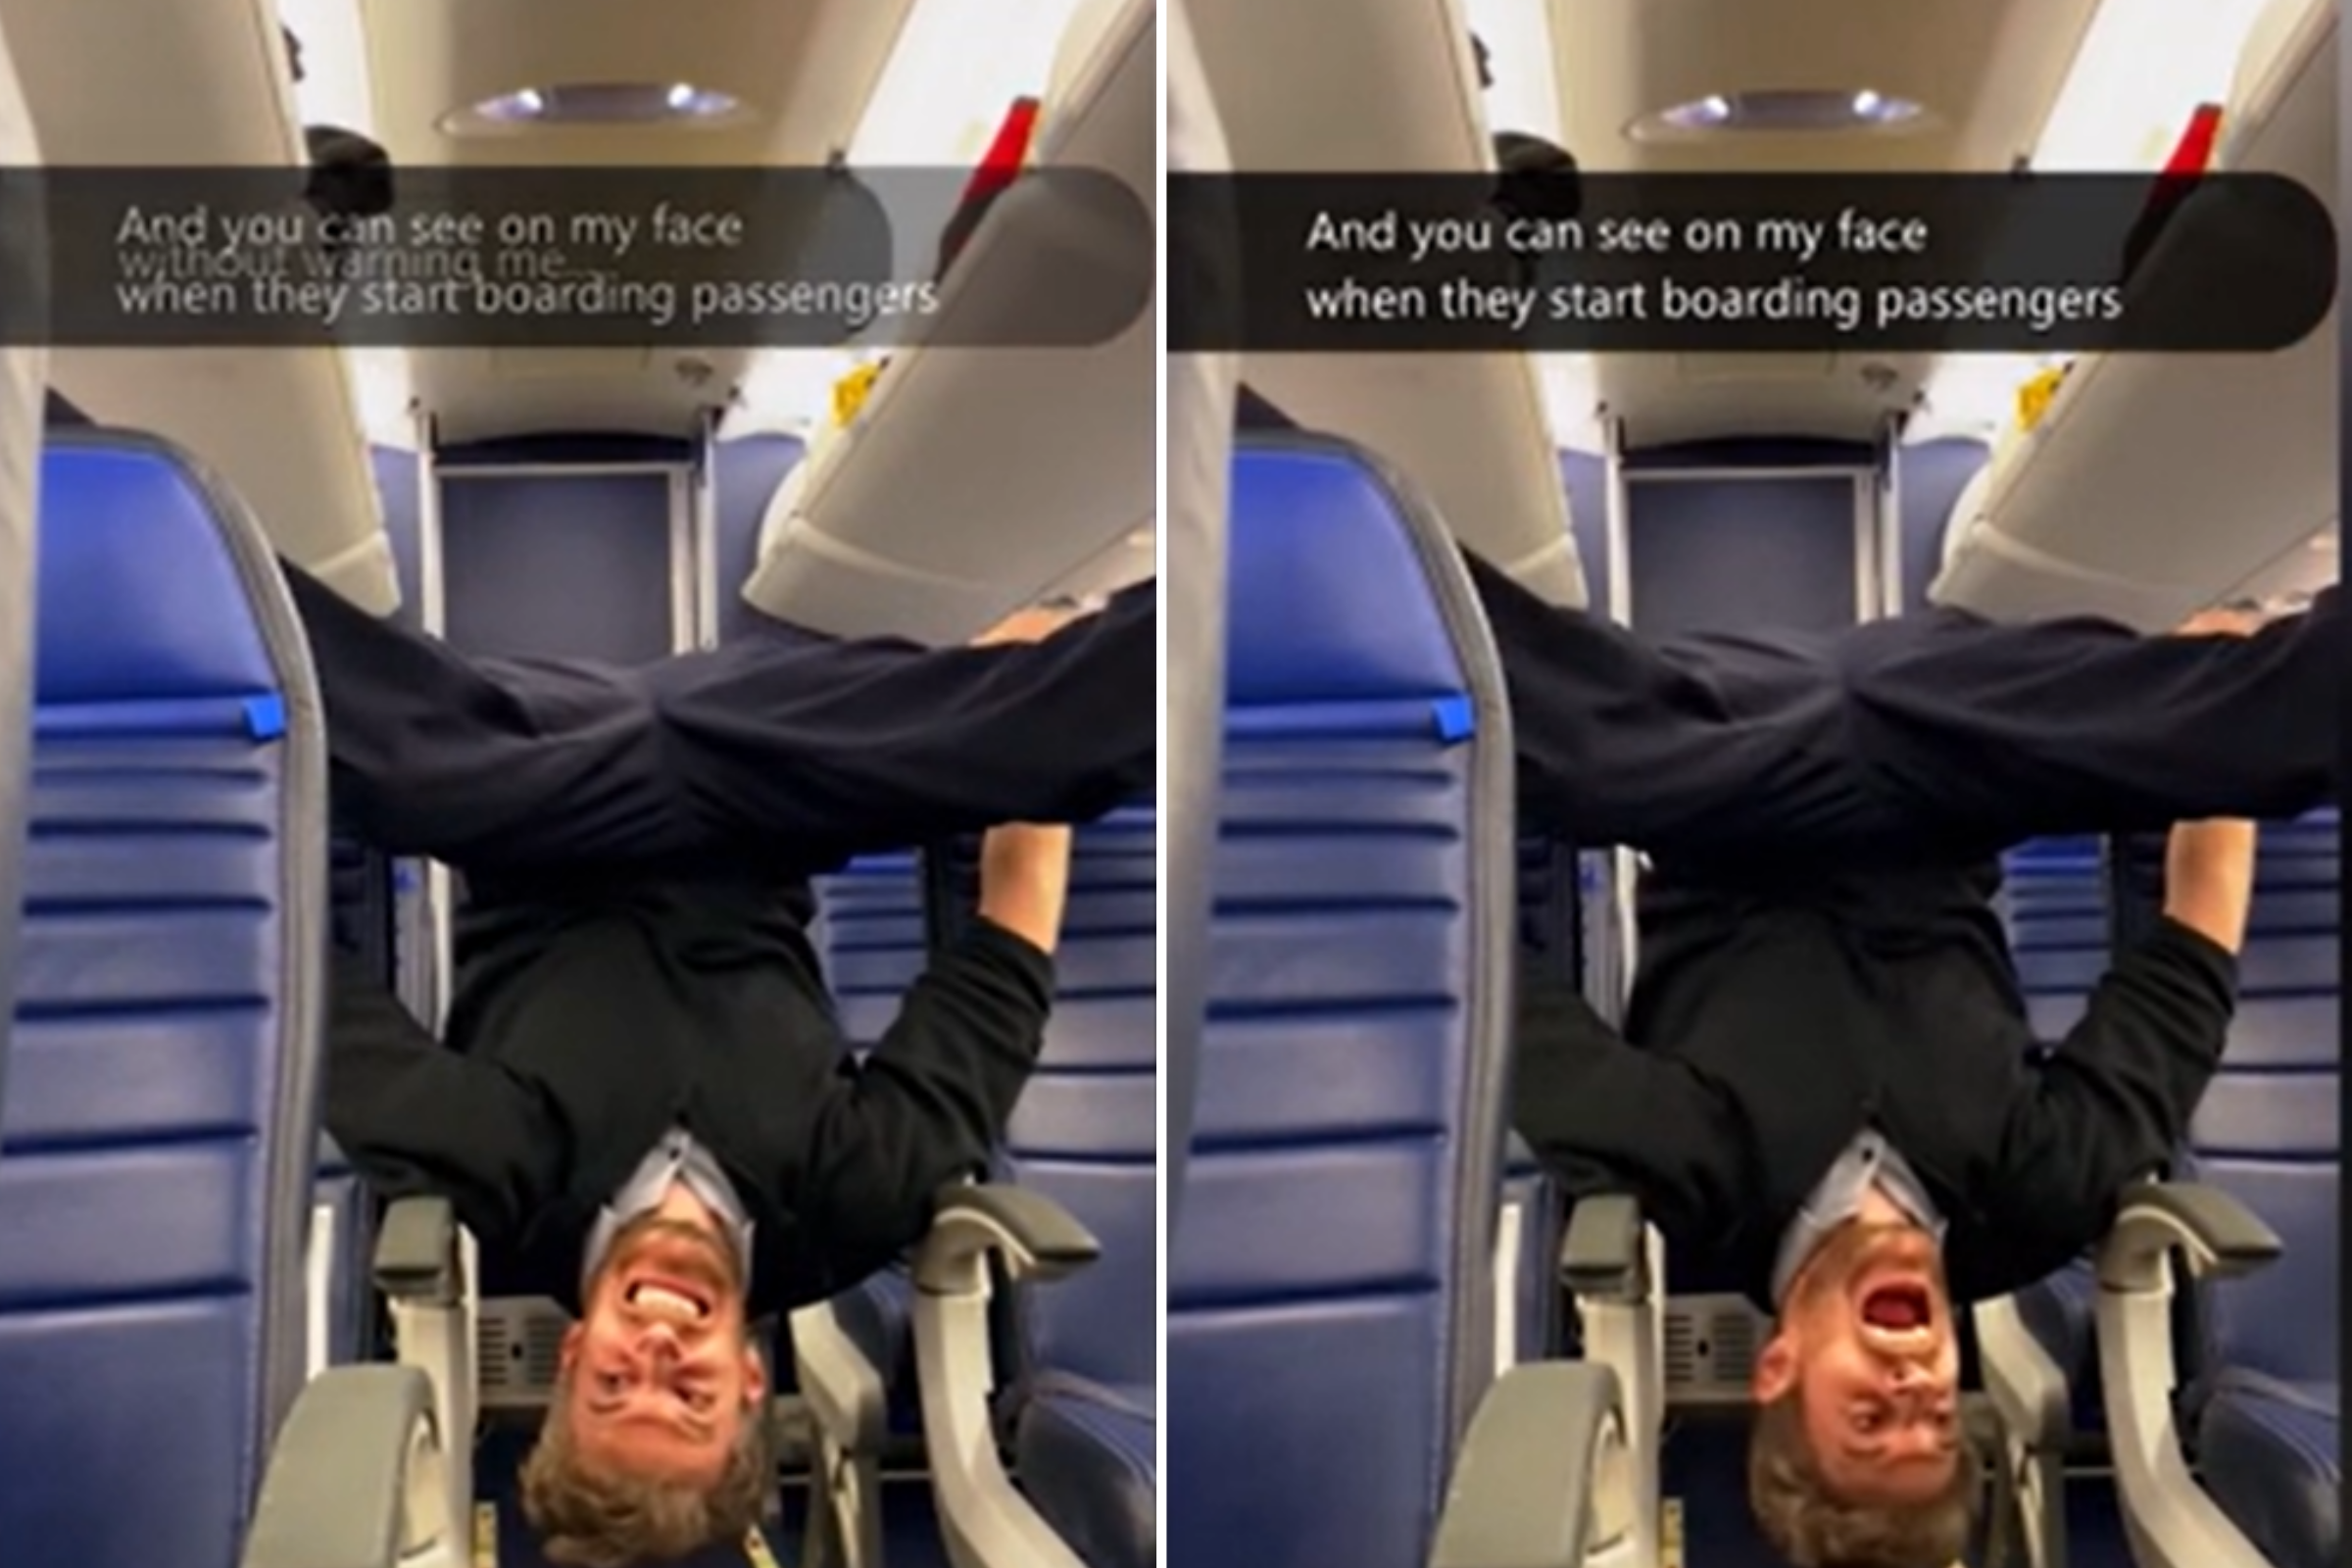 Hilarious Moment Flight Attendant Is Caught Upside Down as Passengers Board